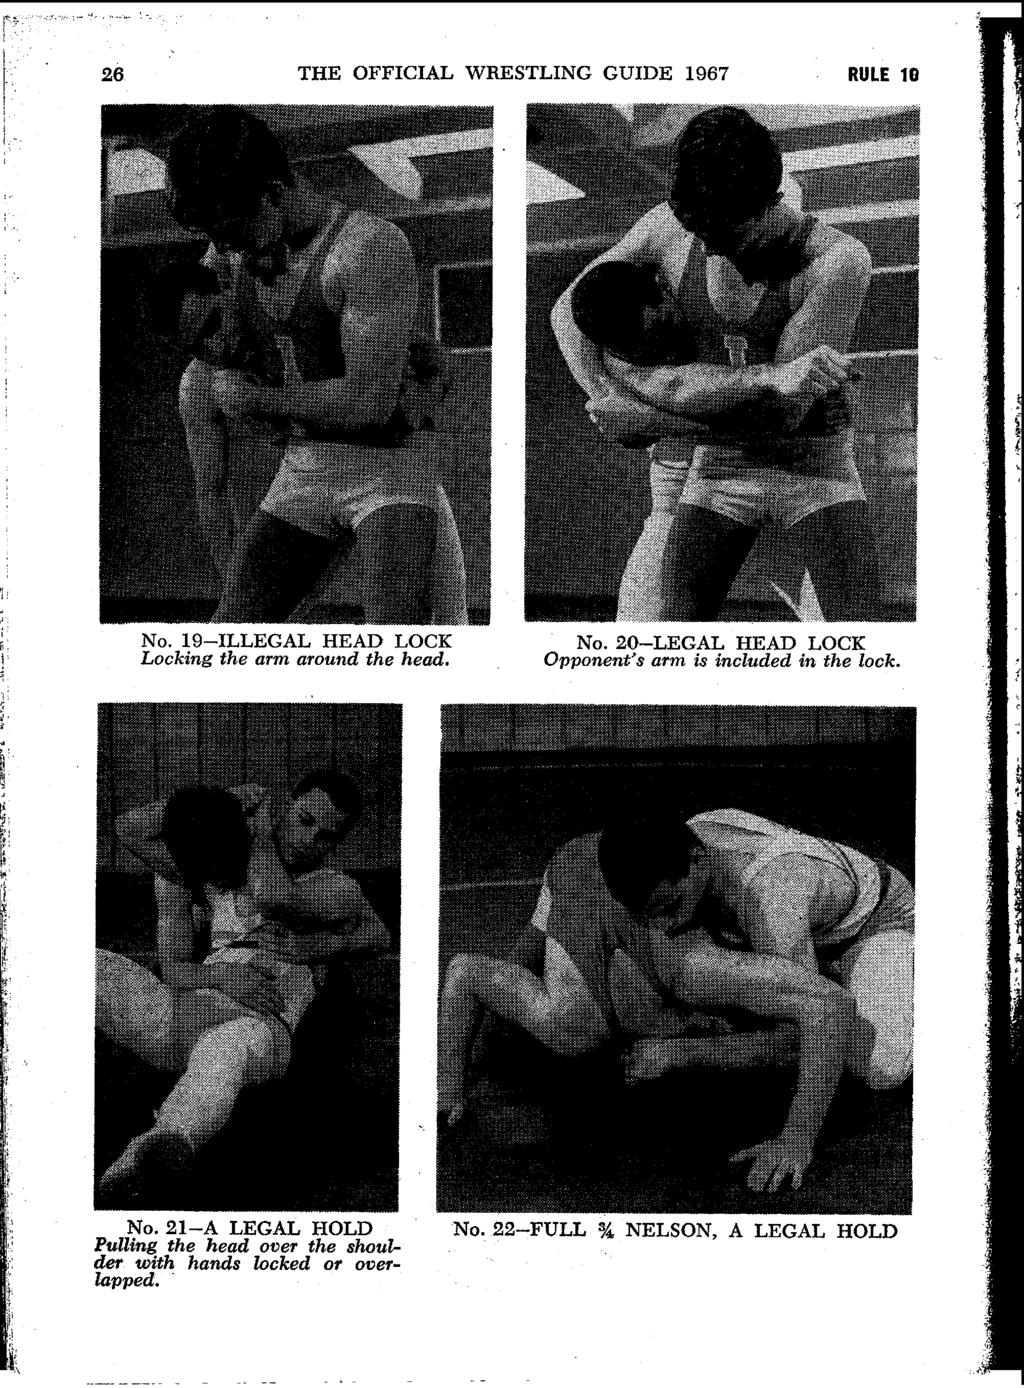 - 4 I 26 THE OFFICIAL WRESTLING GUIDE 1967 RULE 10 NO. 19-ILLEGAL HEAD LOCK Locking the arm around the head. NO. 20-LEGAL HEAD LOCK Opponent's arm is included in the lock.